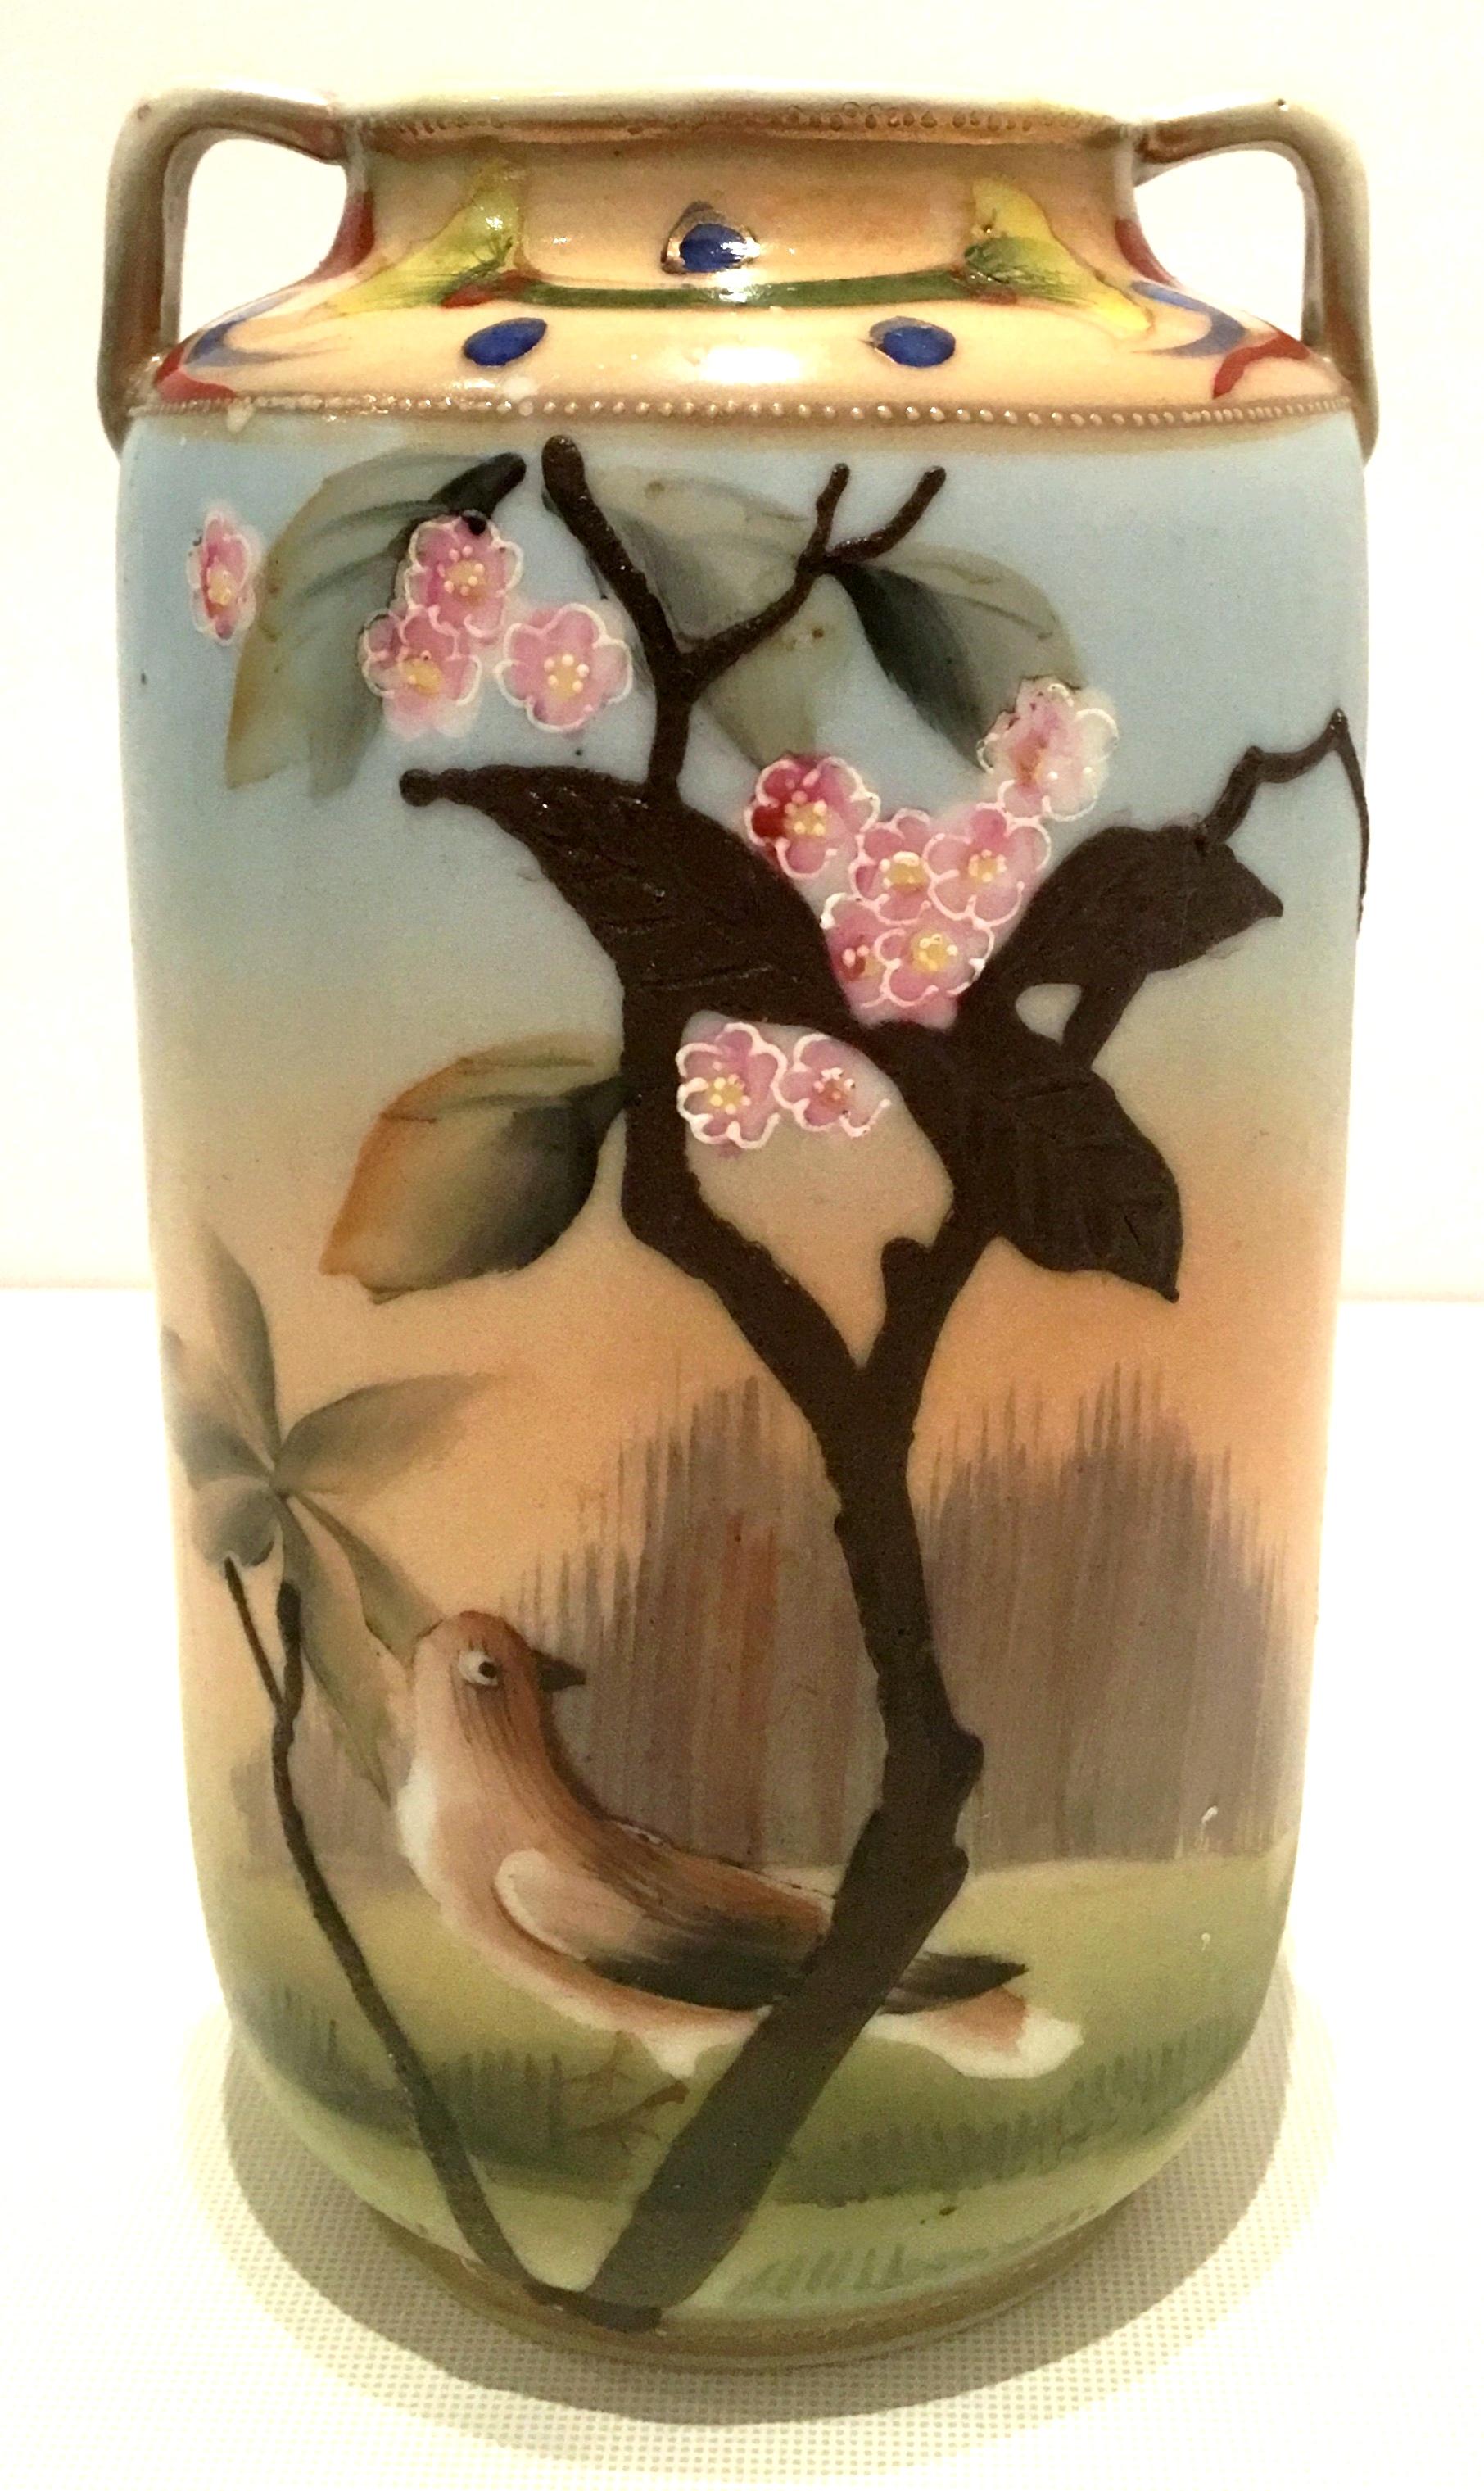 Antique Art Nouveau Japanese hand-painted moriage, 22-karat gold detail two- handle vase. Features a pastel body with raised brown tree and gold raised bead detail. Signed on the underside in green, hand-painted Nippon.